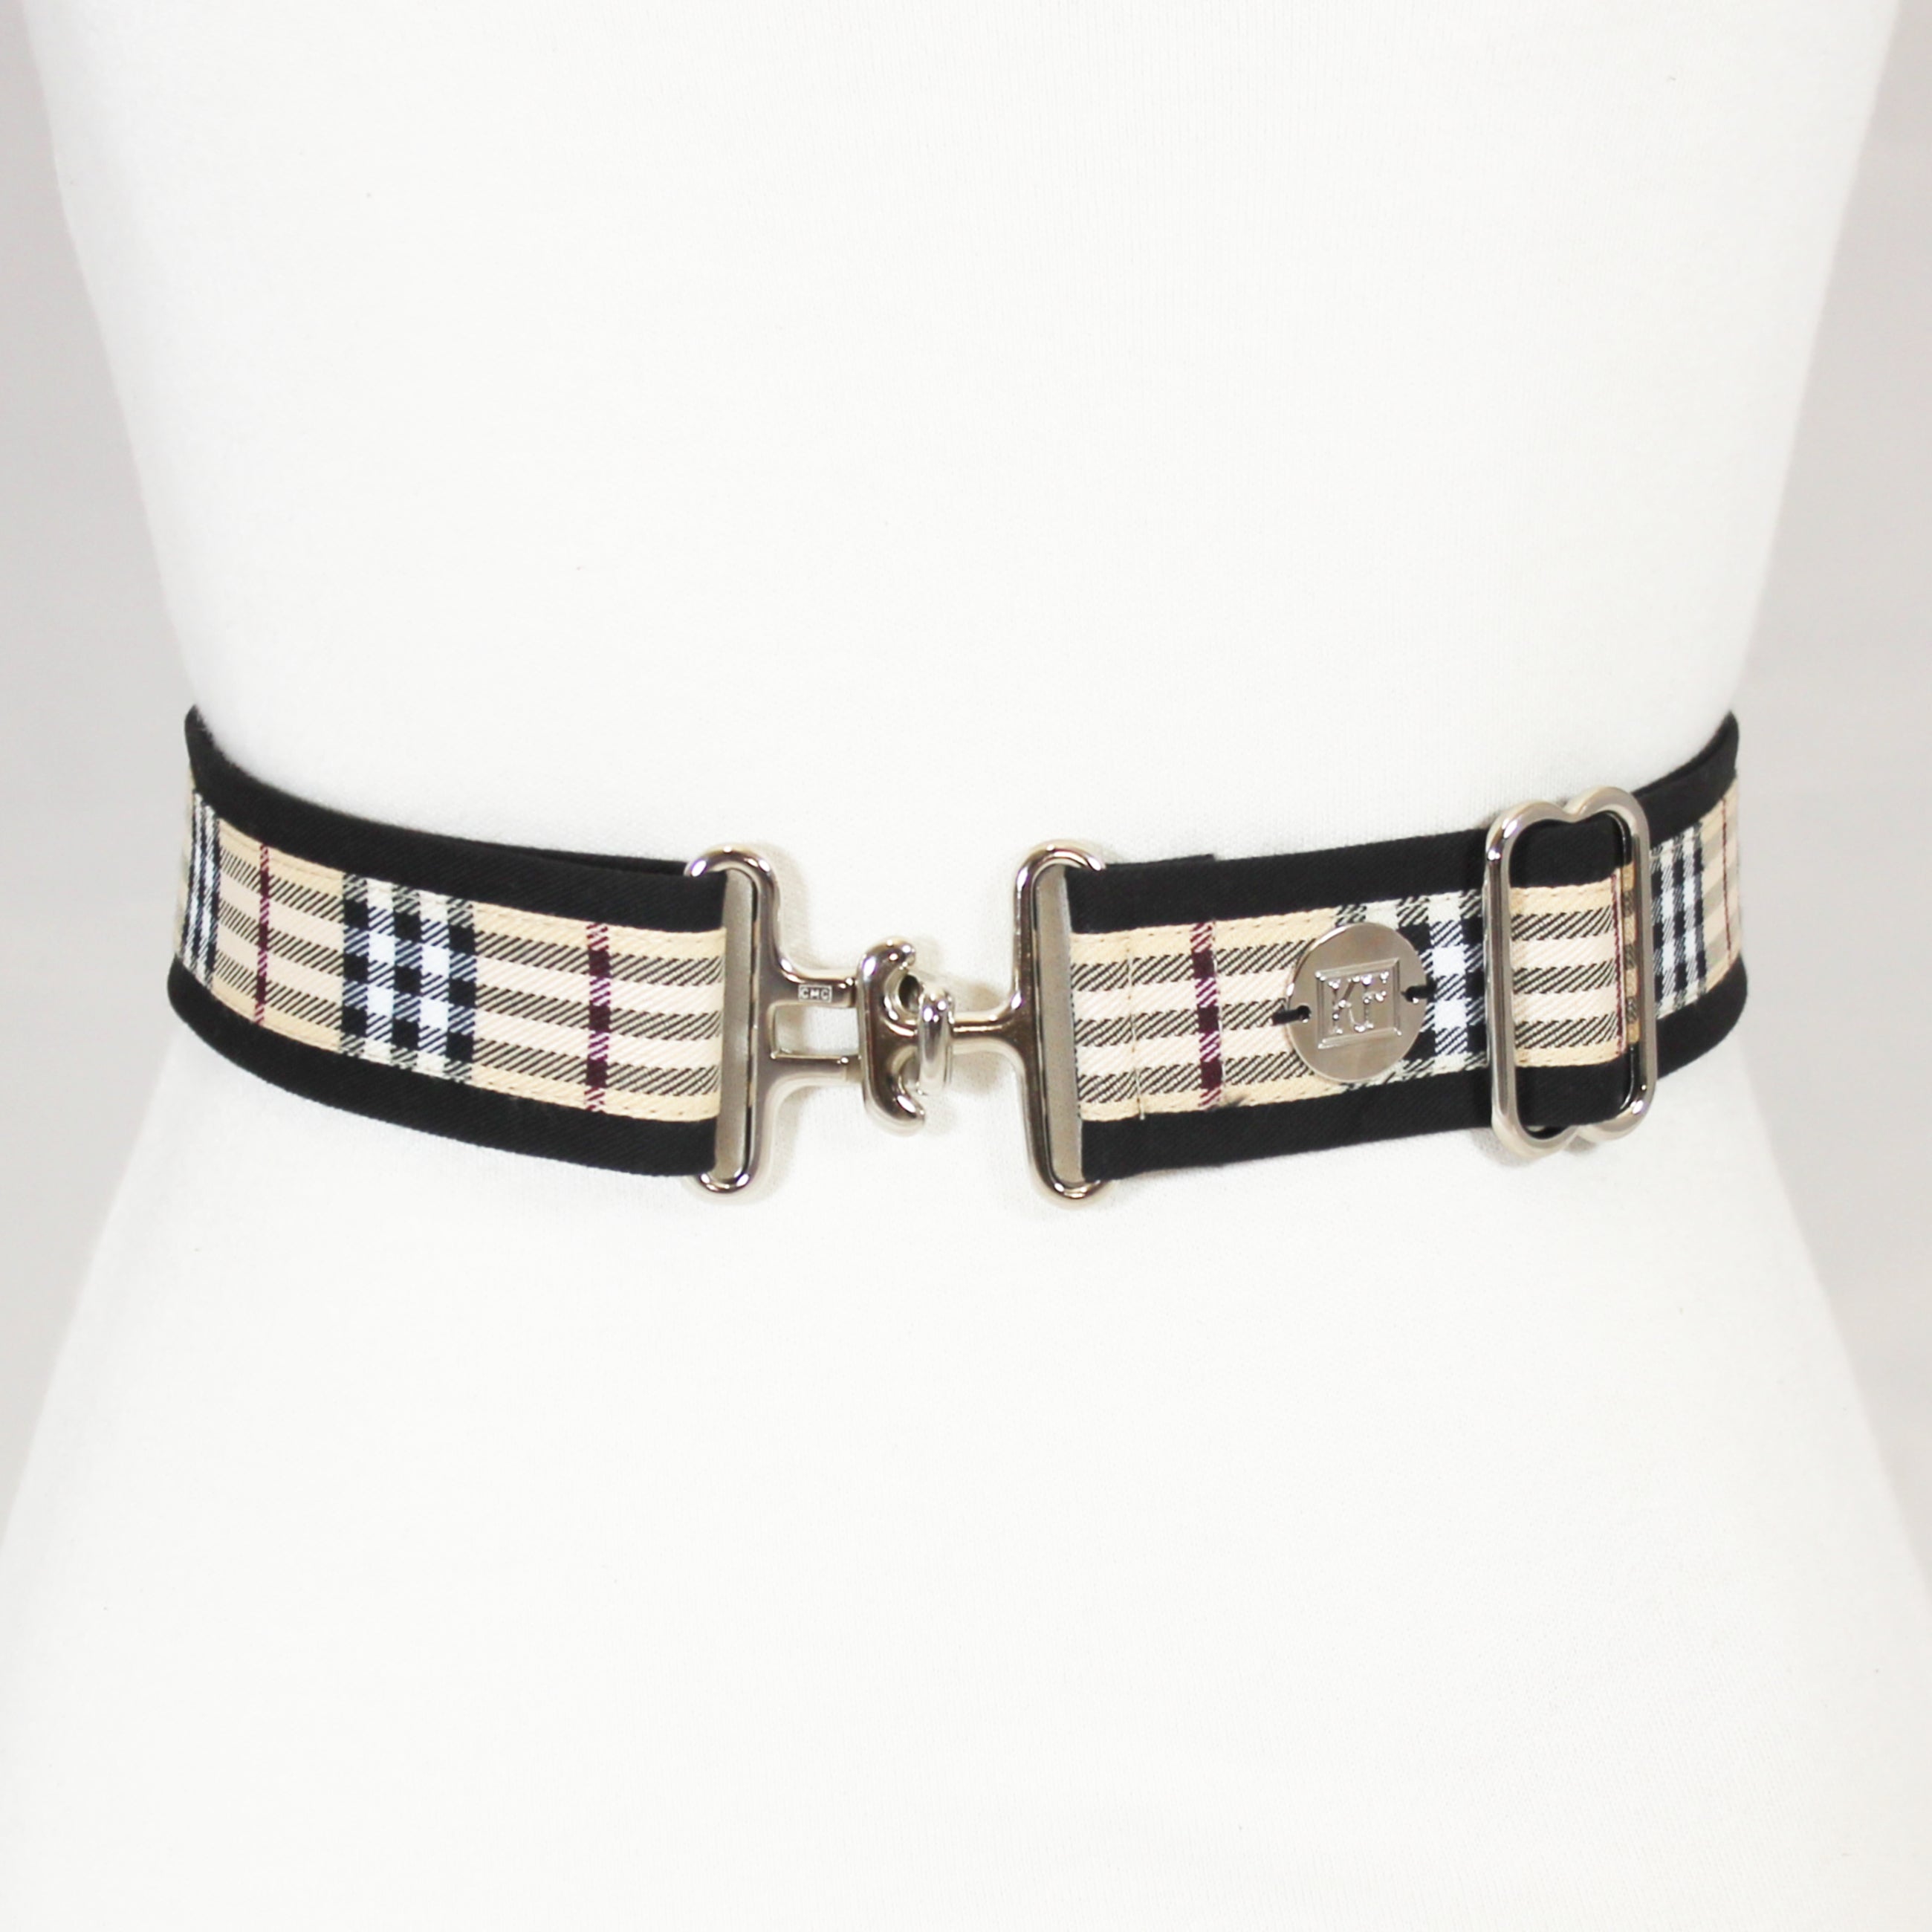 Tan plaid belt with 1.5" silver surcingle buckle by KF Clothing